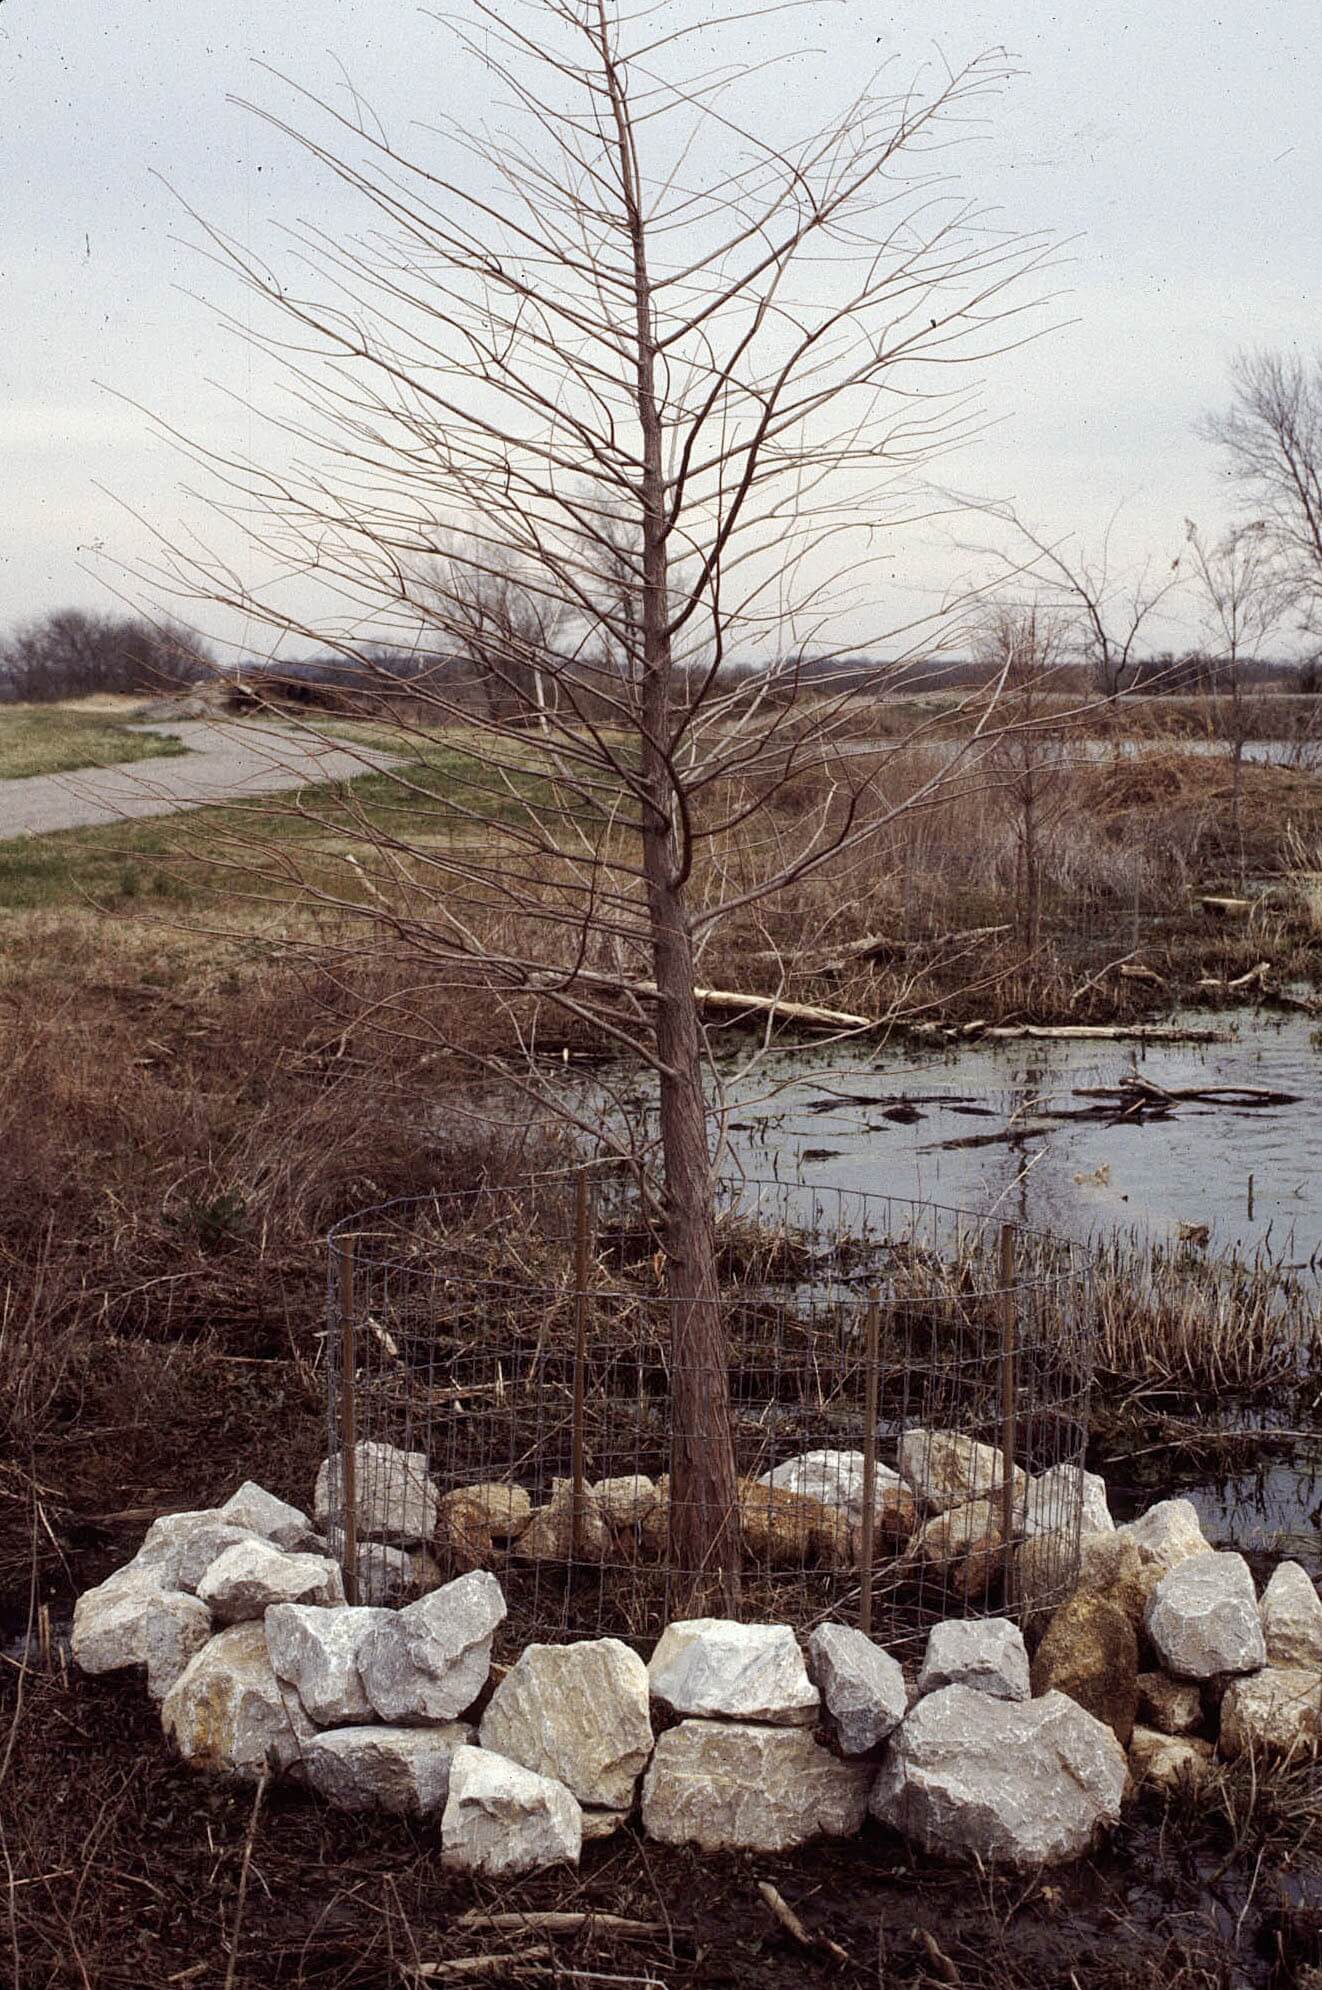 Figure 5. Rock placed around a 2-inch
by 4-inch woven wire beaver exclosure
protecting a bald cypress tree at water's
edge on Dalrymple Pond.